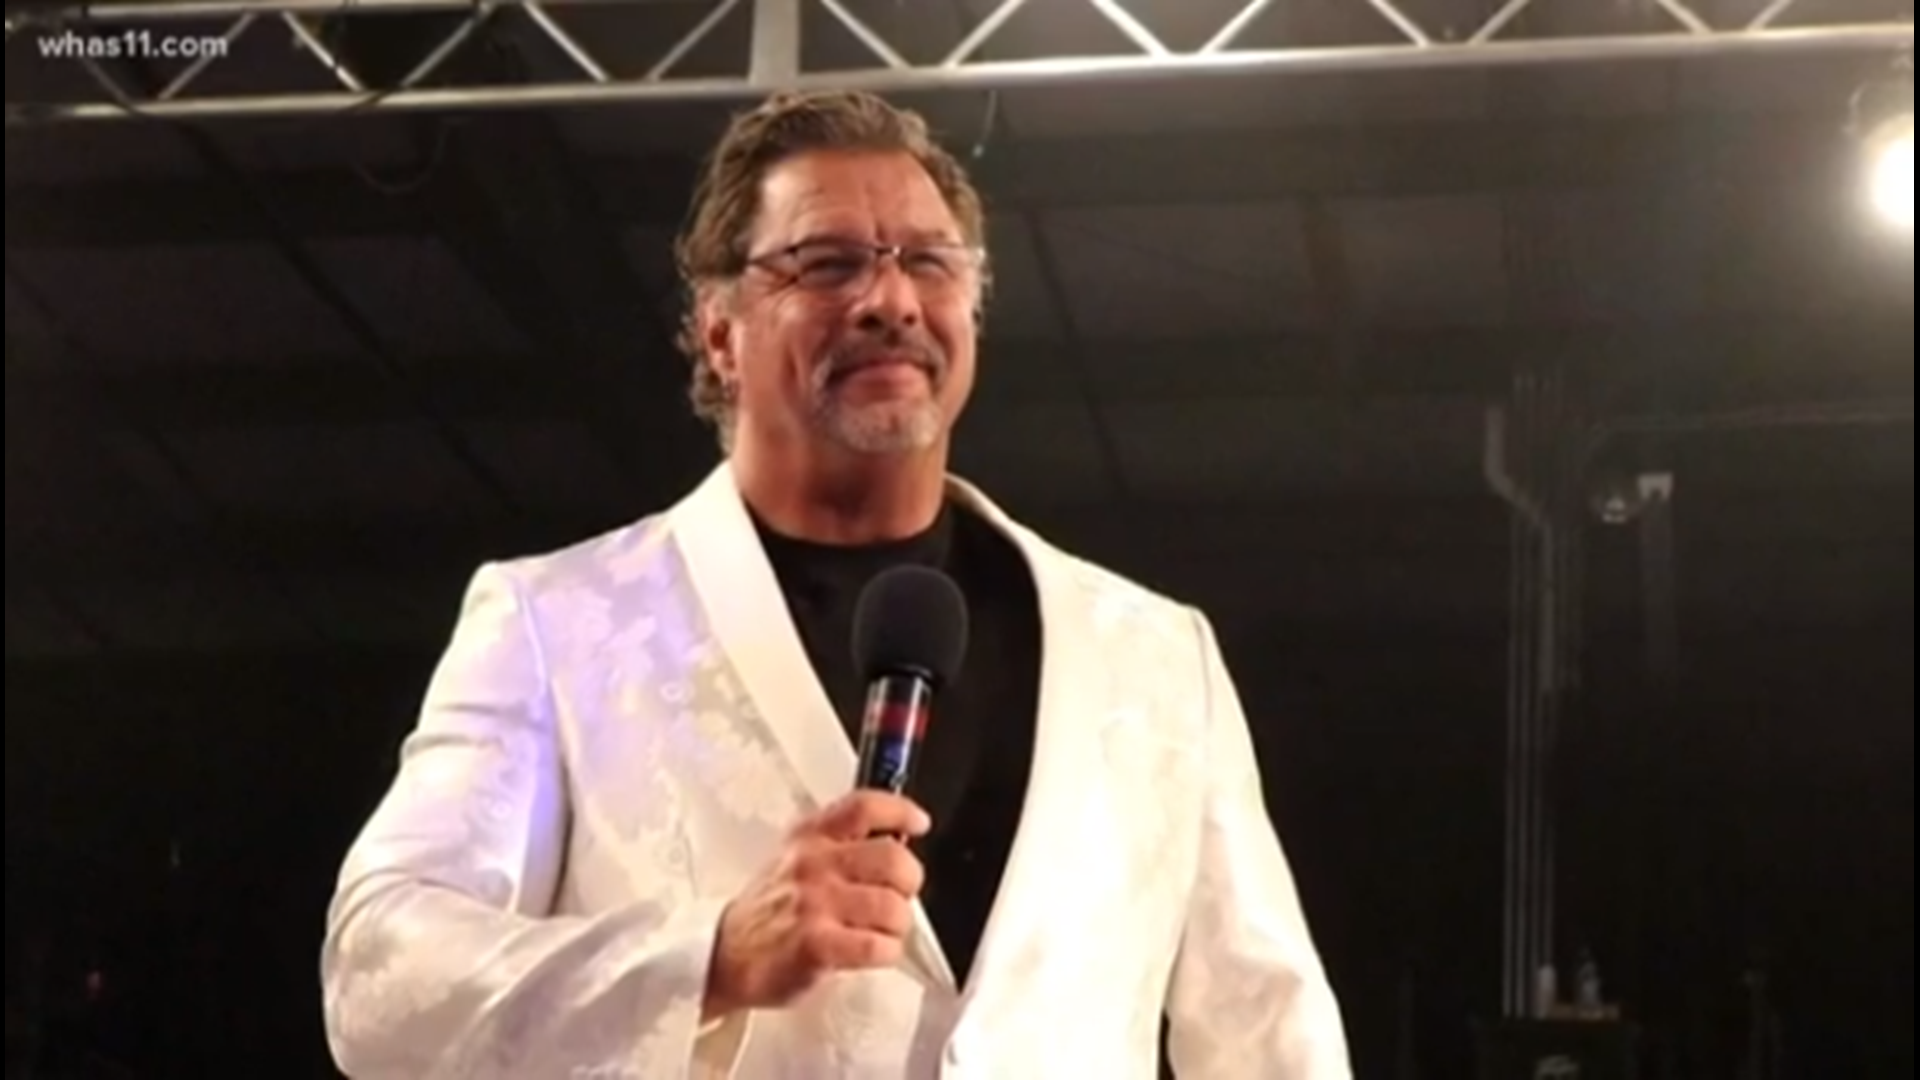 WWE icon Al Snow talks about the new OVW Wrestling show, how he stays in shape while social distancing at home, WWE Wrestling + the perfect Al Snow Halloween costume